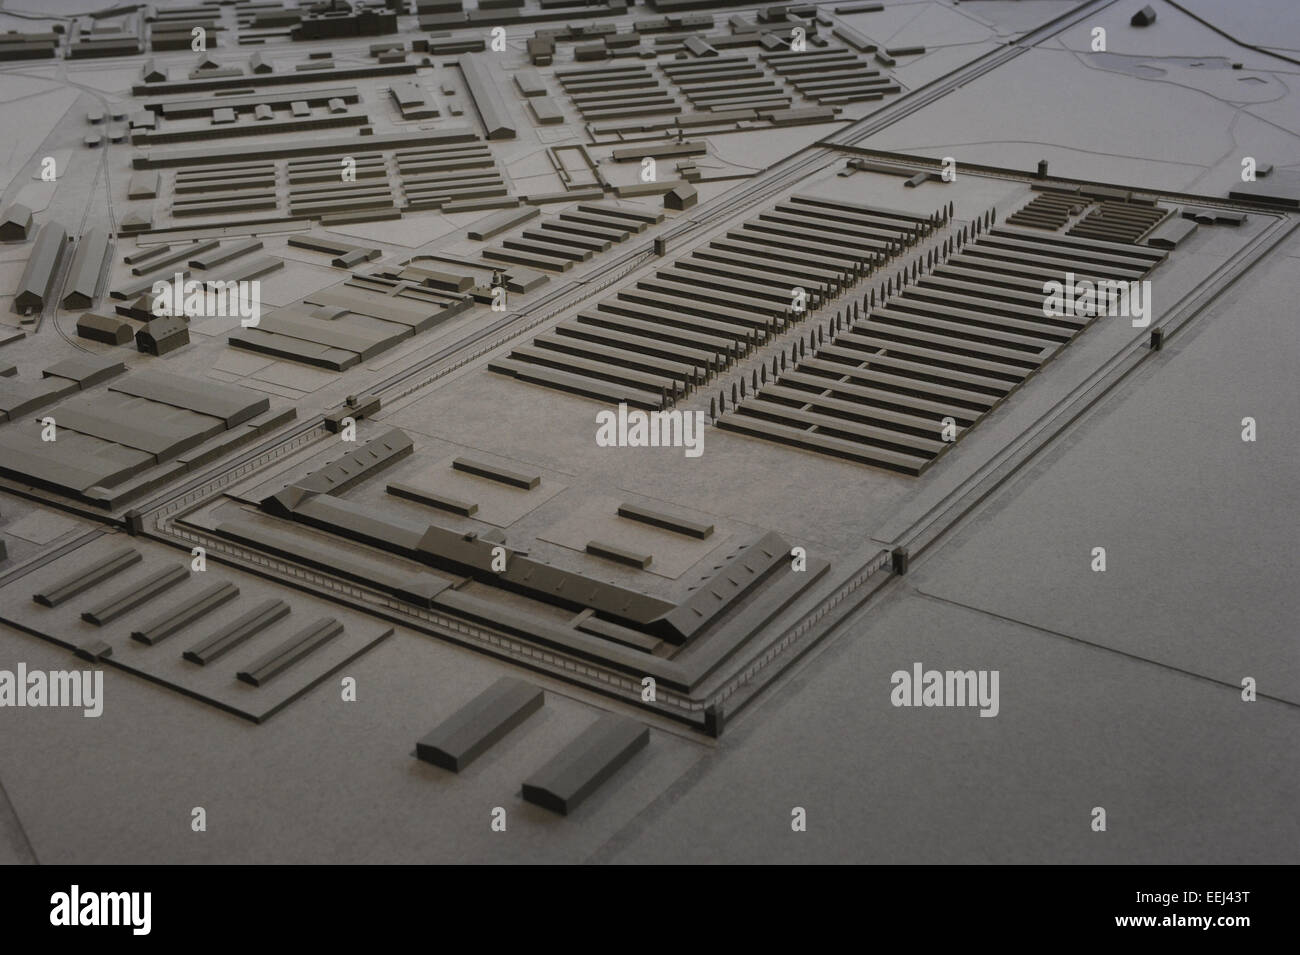 Scale model. Dachau concentration camp. Germany. 1945. Stock Photo